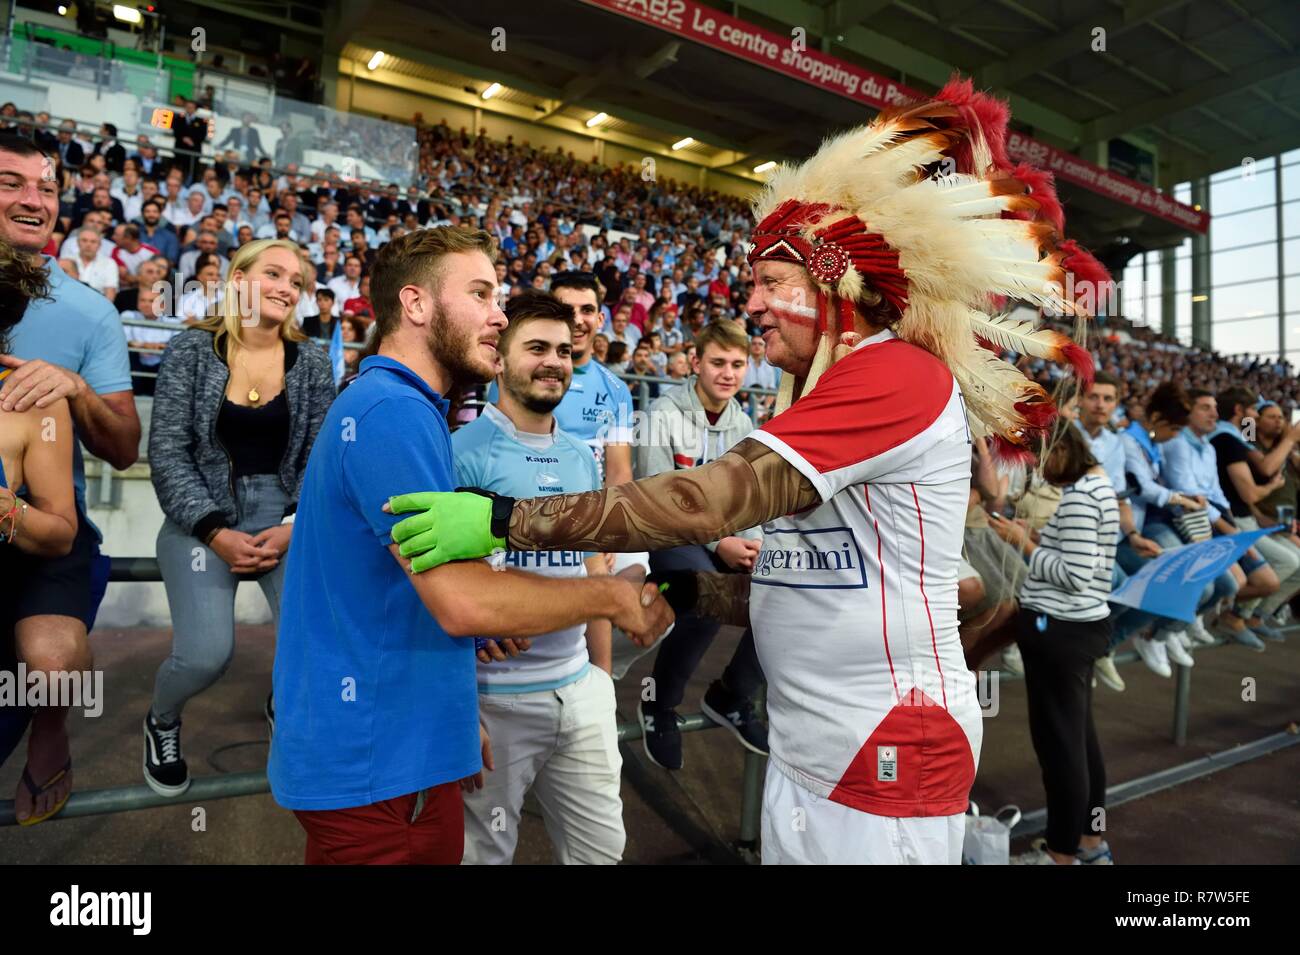 France, Pyrenees Atlantiques, Basque Country, Bayonne, Jean-Dauger stadium,  rugby Basque derby between Aviron Bayonnais (in blue) and Biarritz Olympique,  show of Robert Rabagny called Geronimo, former mascot of the Biarritz  Olympique rugby